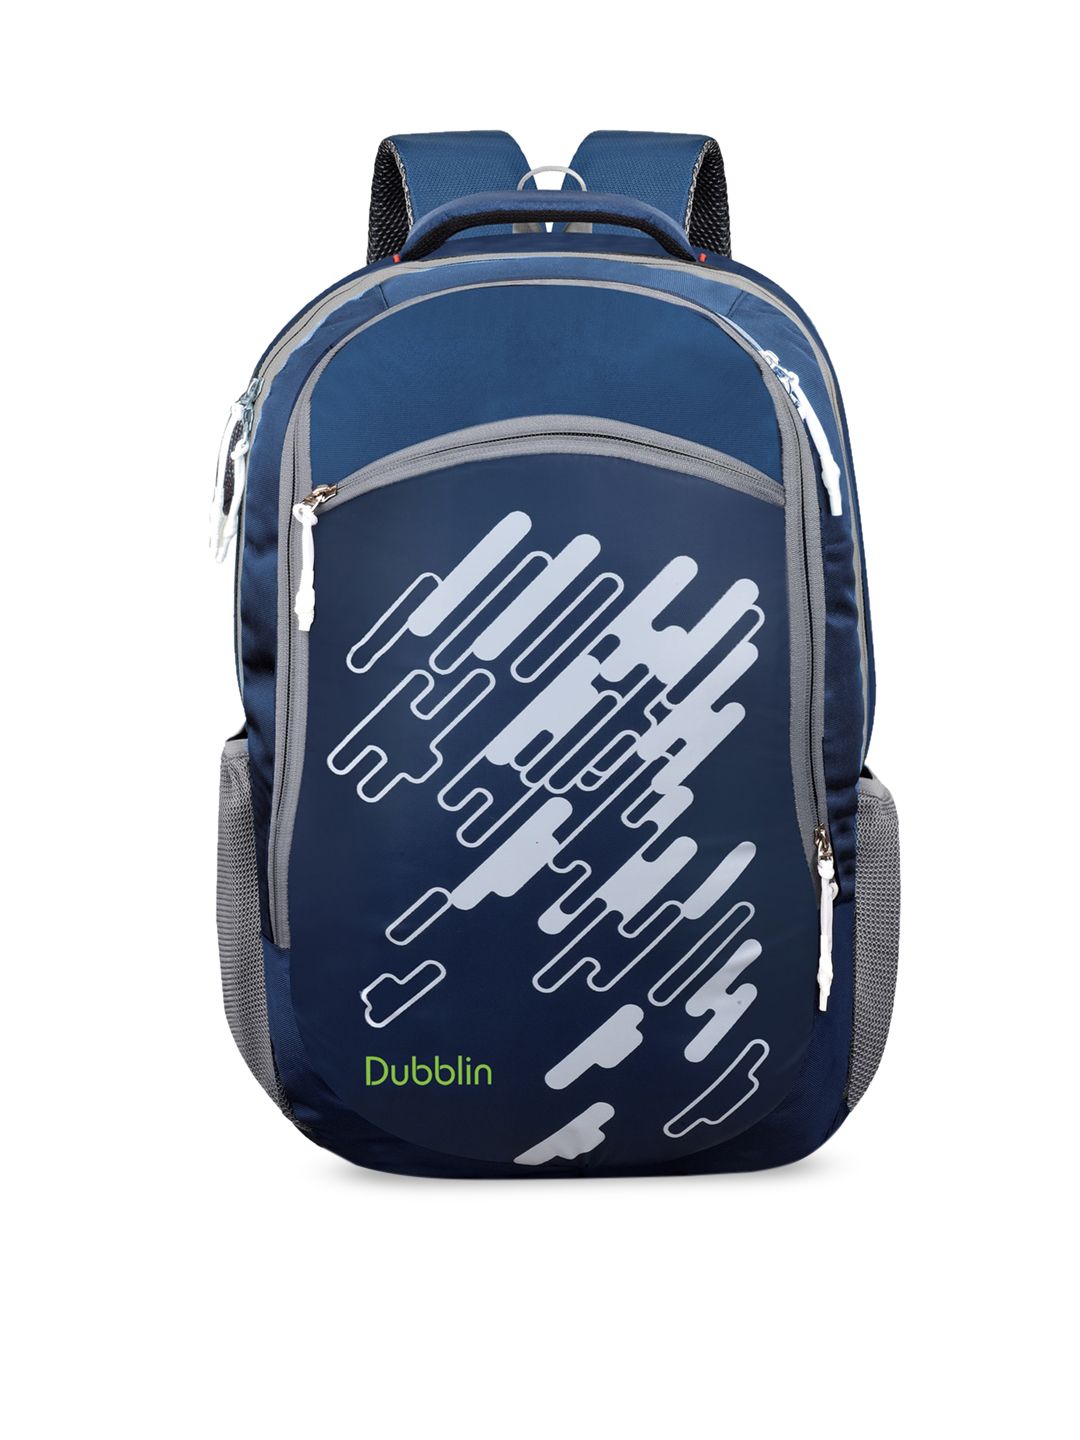 Dubblin Unisex Blue Laptop Backpack Price in India